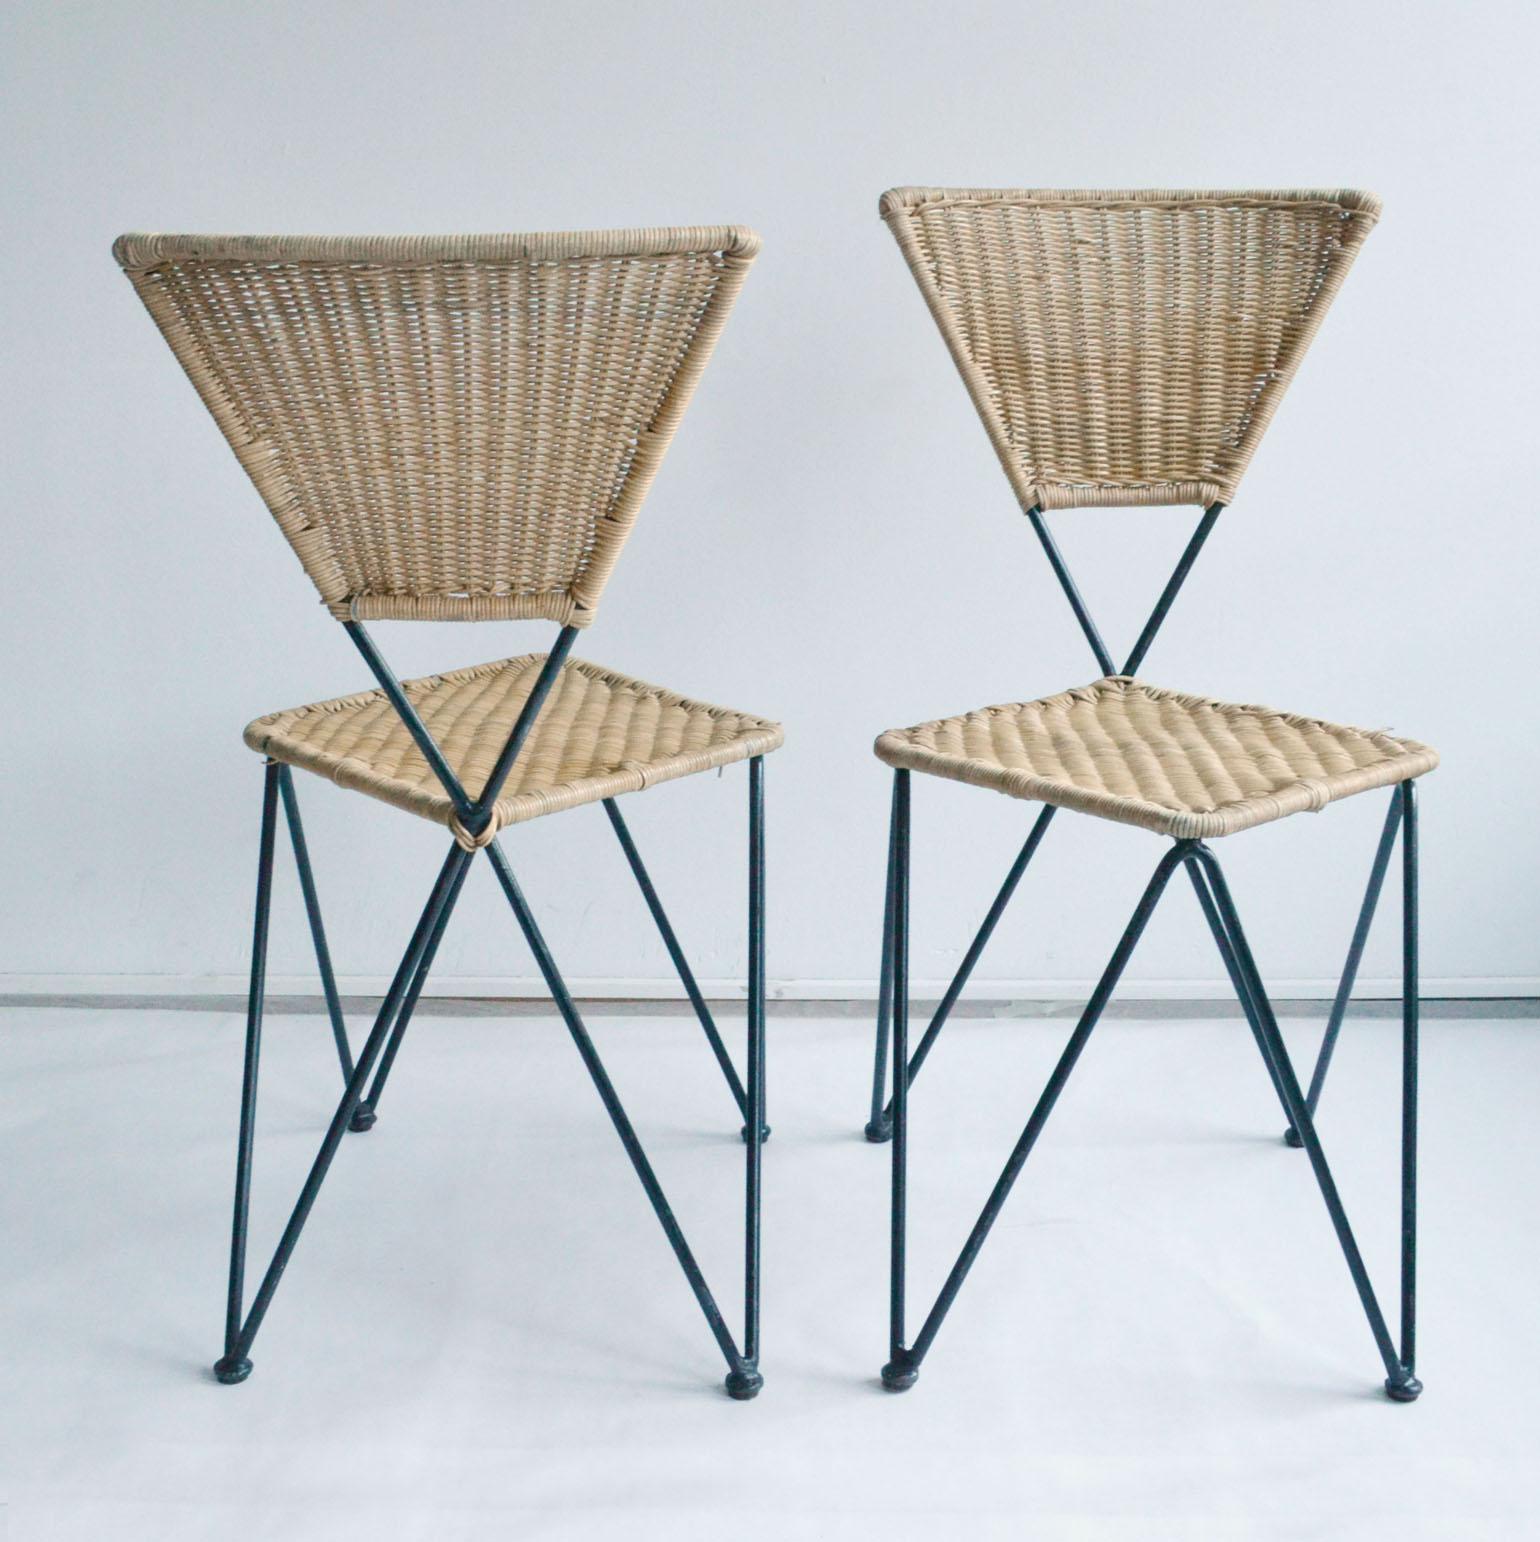 Metalwork Pair of Wicker and Metal Dining Chairs, Vienna, 1950